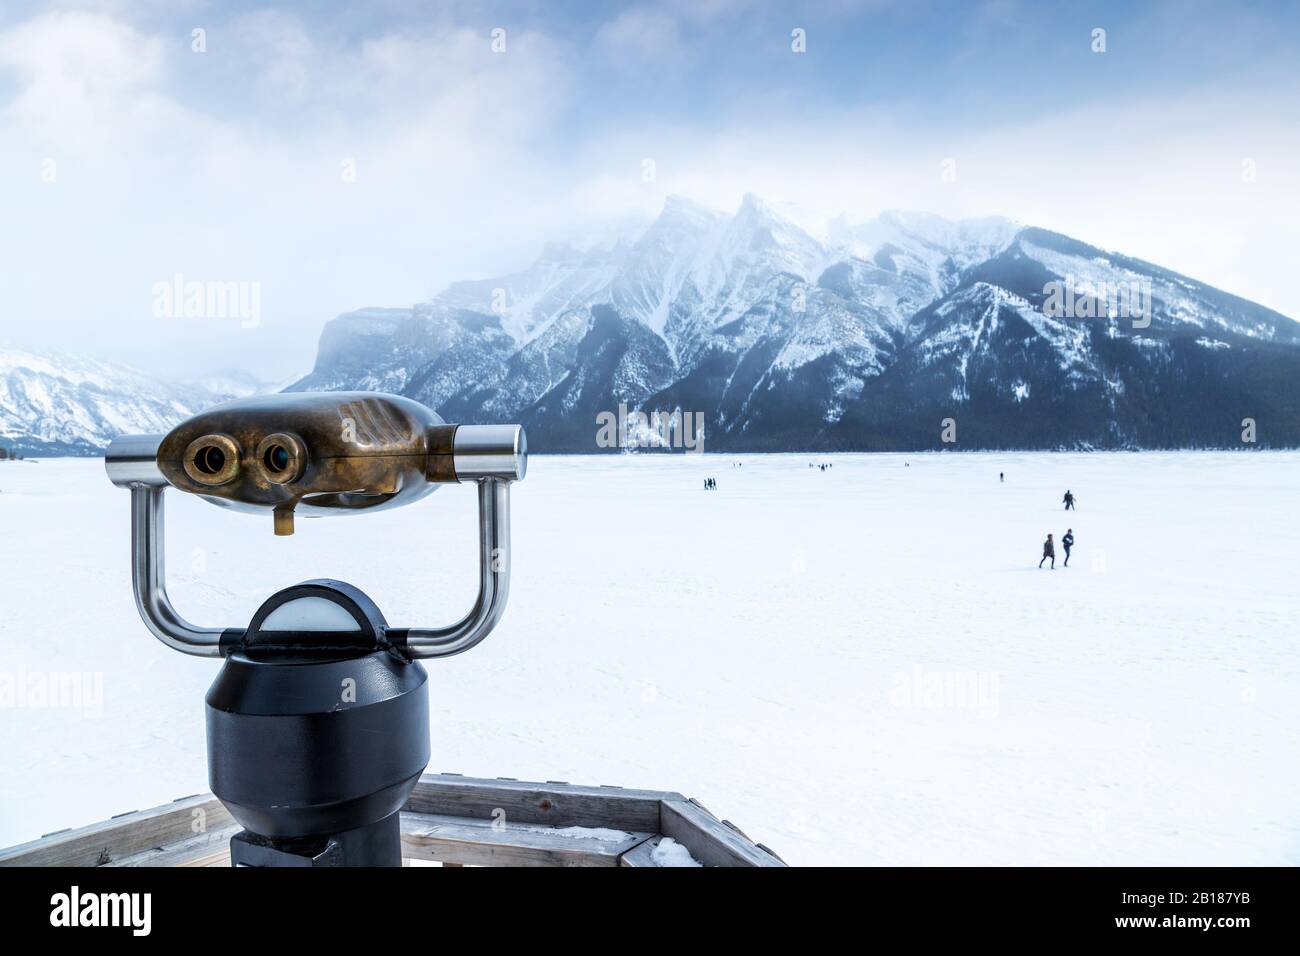 Focus on tower viewer or binoculars overlooking Lake Minnewanka and cloud-covered Mount Inglismaldie in the Canadian Rockies of Banff National Park du Stock Photo